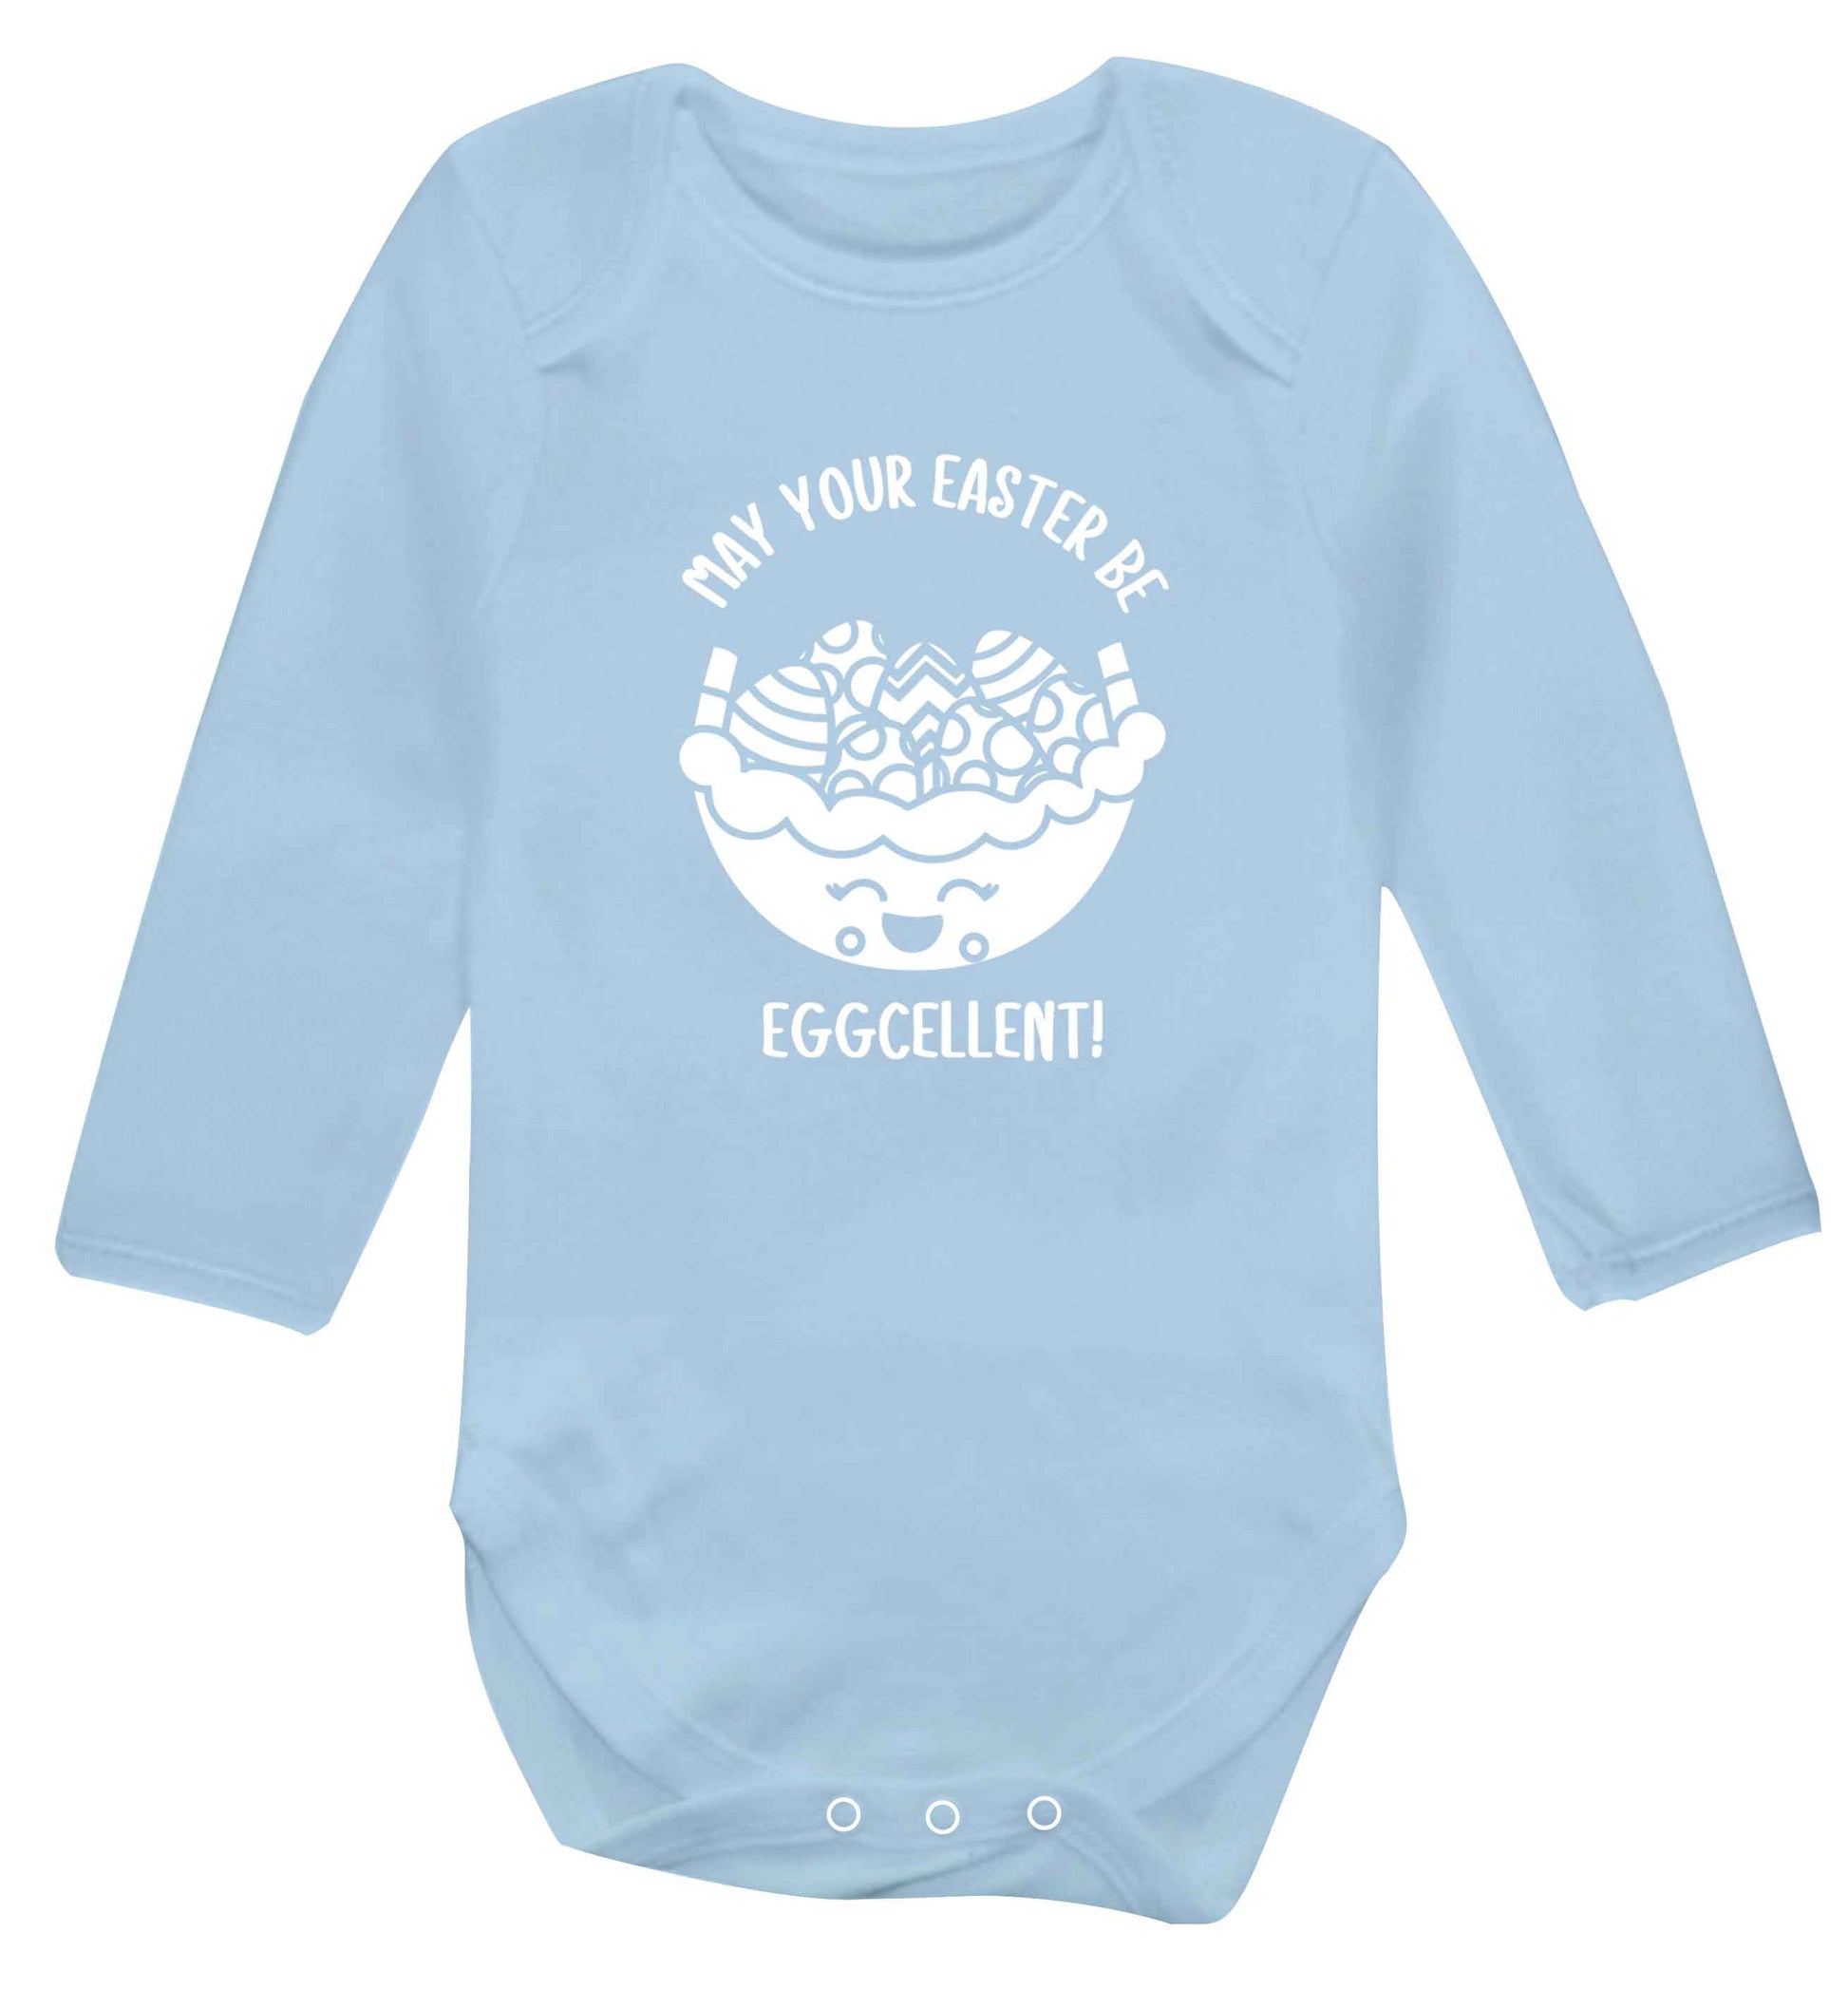 May your Easter be eggcellent baby vest long sleeved pale blue 6-12 months